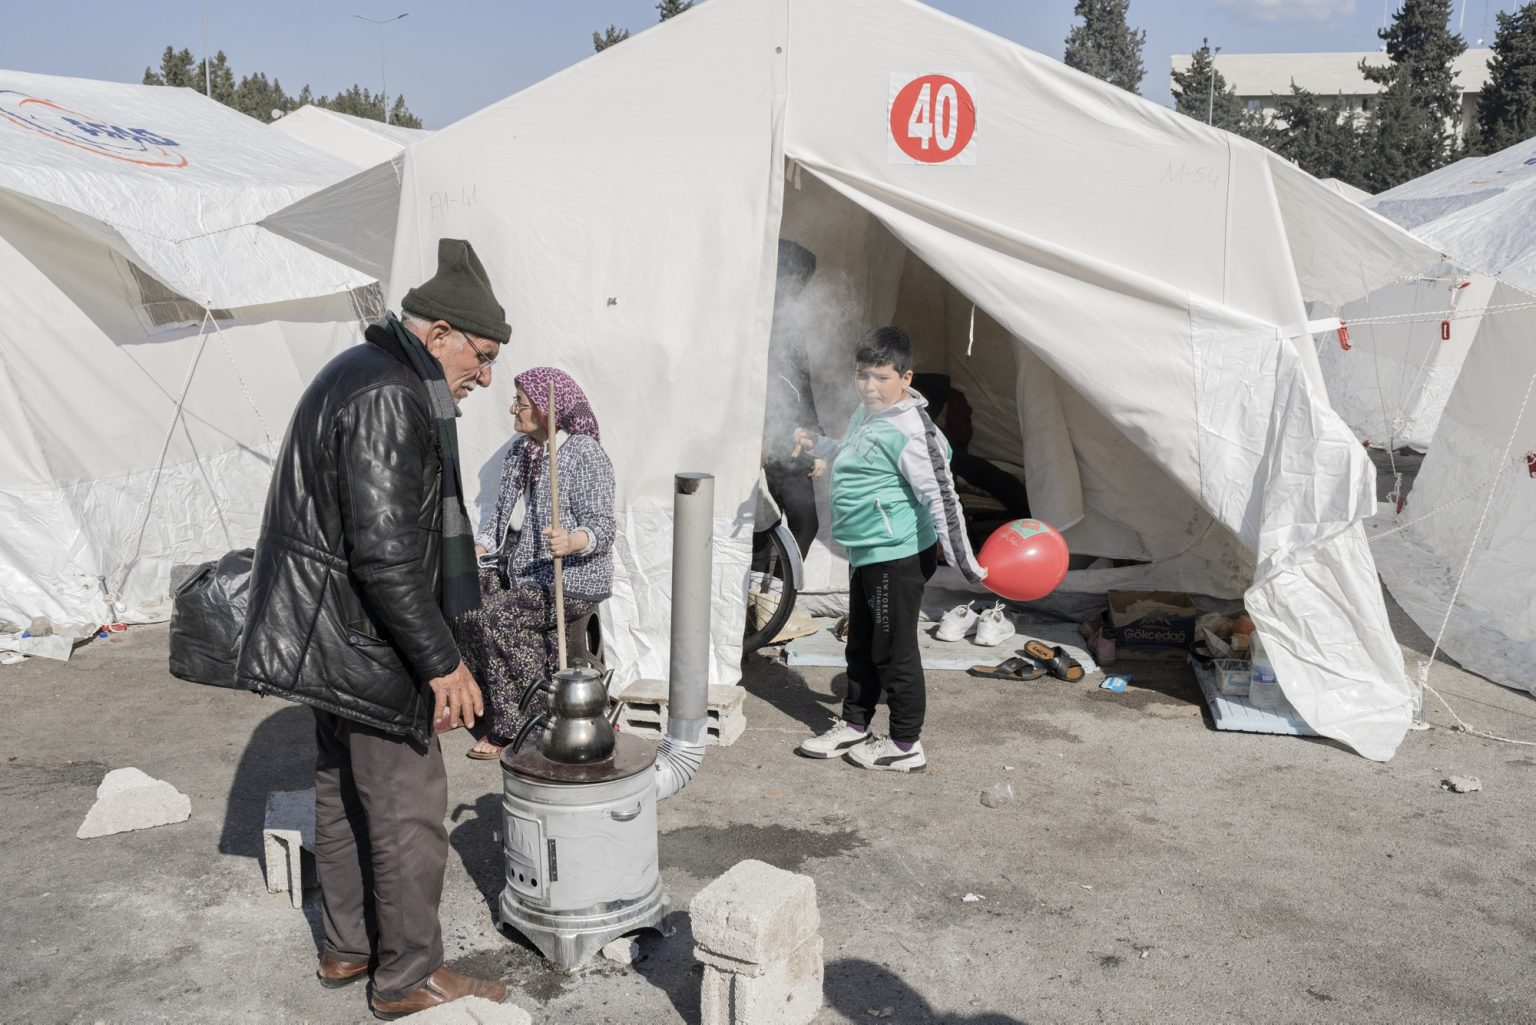 Osmaniye, Turkey, February 2023 - The aftermath of the earthquake that hit southern Turkey and northern Syria.    People stand outside a tent in one of the tent camps set up in the city.><
Osmaniye, Turchia, febbraio 2023  Le conseguenze del terremoto che ha colpito la Turchia del Sud e la Siria del nord.